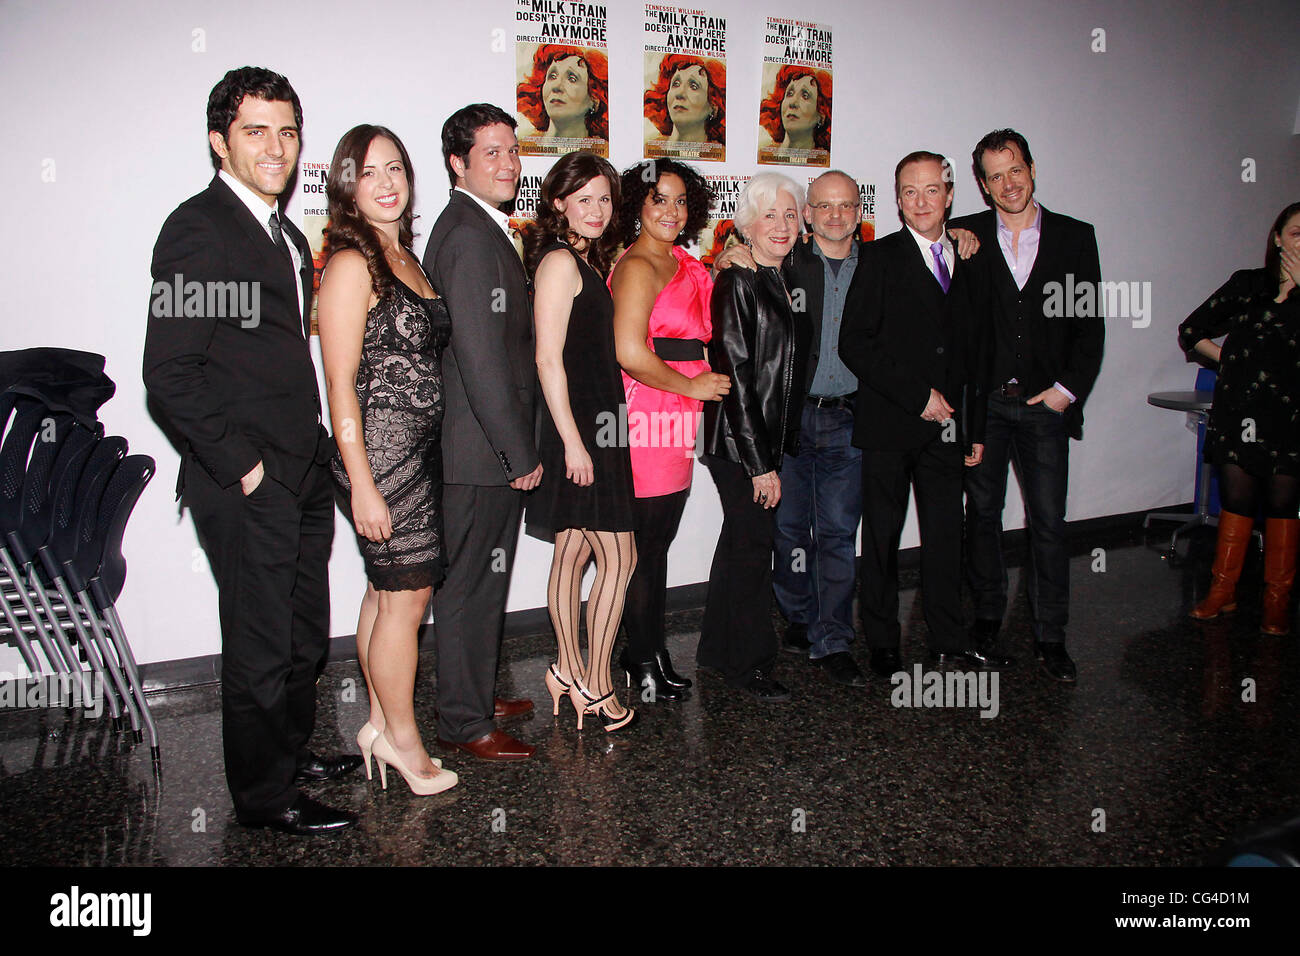 Kevin Fugaro, Amanda Tudor, Curtis Billings, Maggie Lacey, Elisa Bocanegra, Olympia Dukakis, Michael Wilson, Edward Hibbert and Darren Pettie  Opening night of the Roundabout Theatre Company production of 'The Milk Train Doesn't Stop Here Anymore' at the Stock Photo